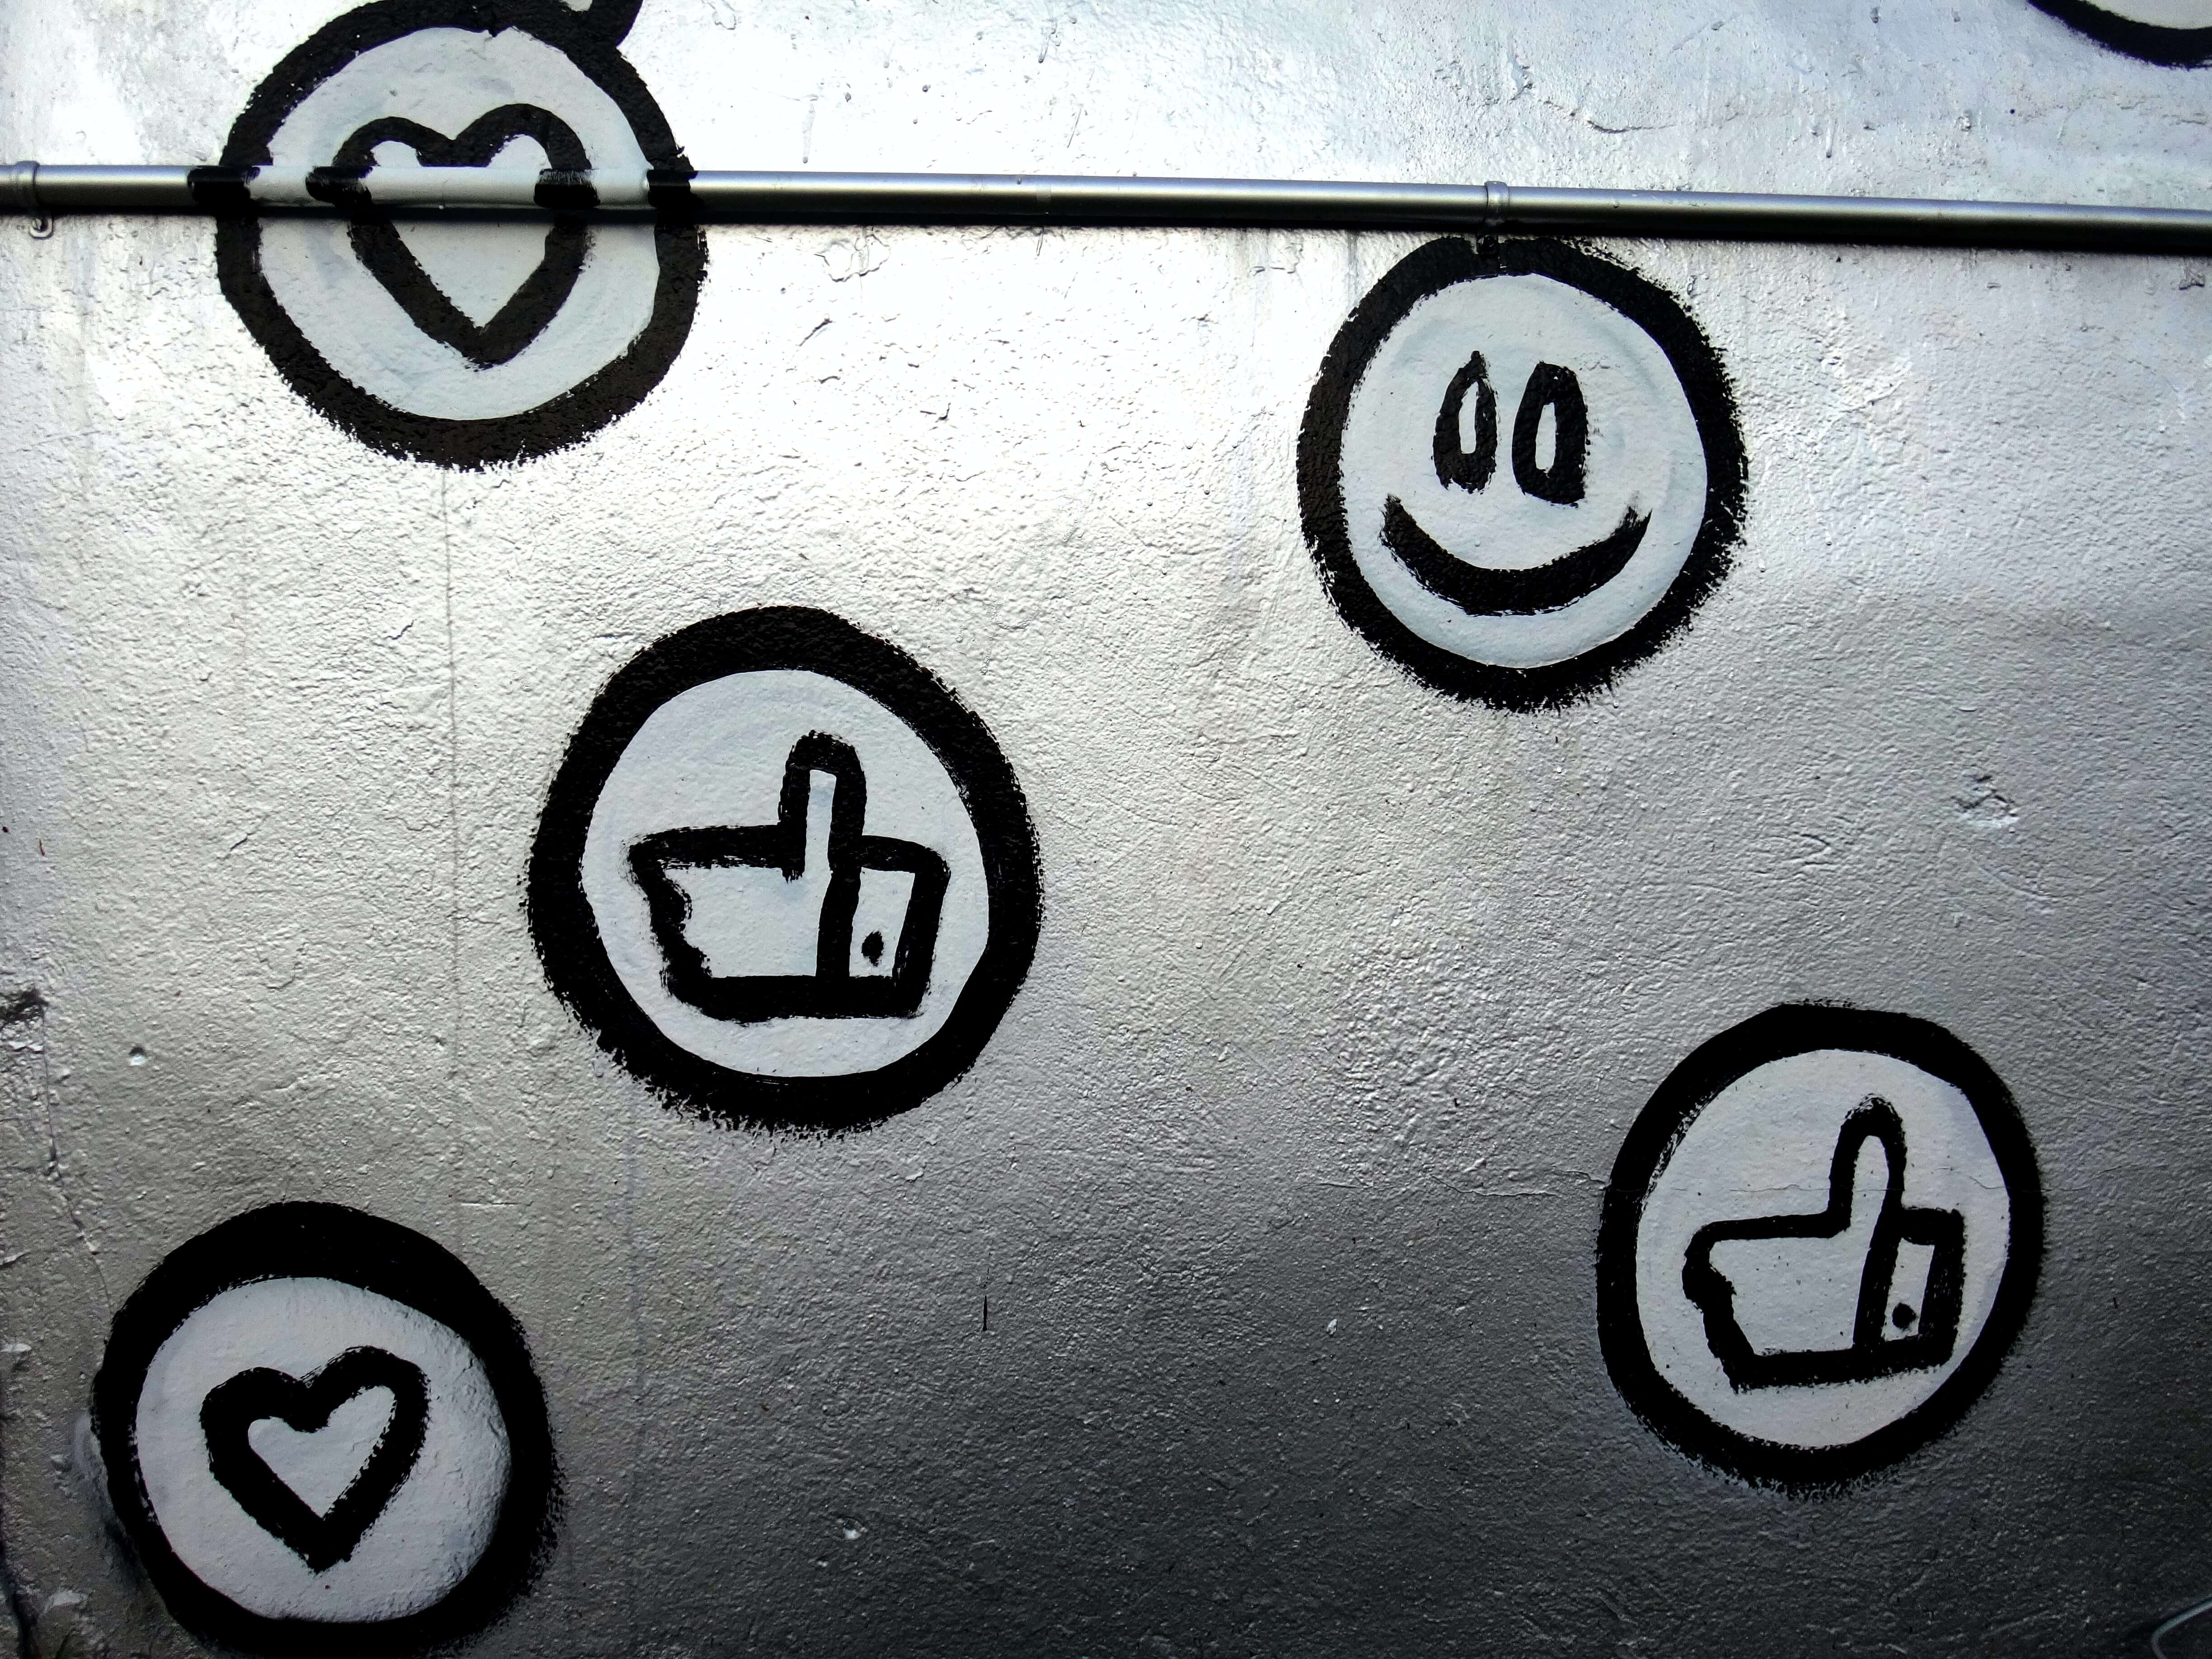 Thumbs up, heart, and smiley face icons spray painted on a wall